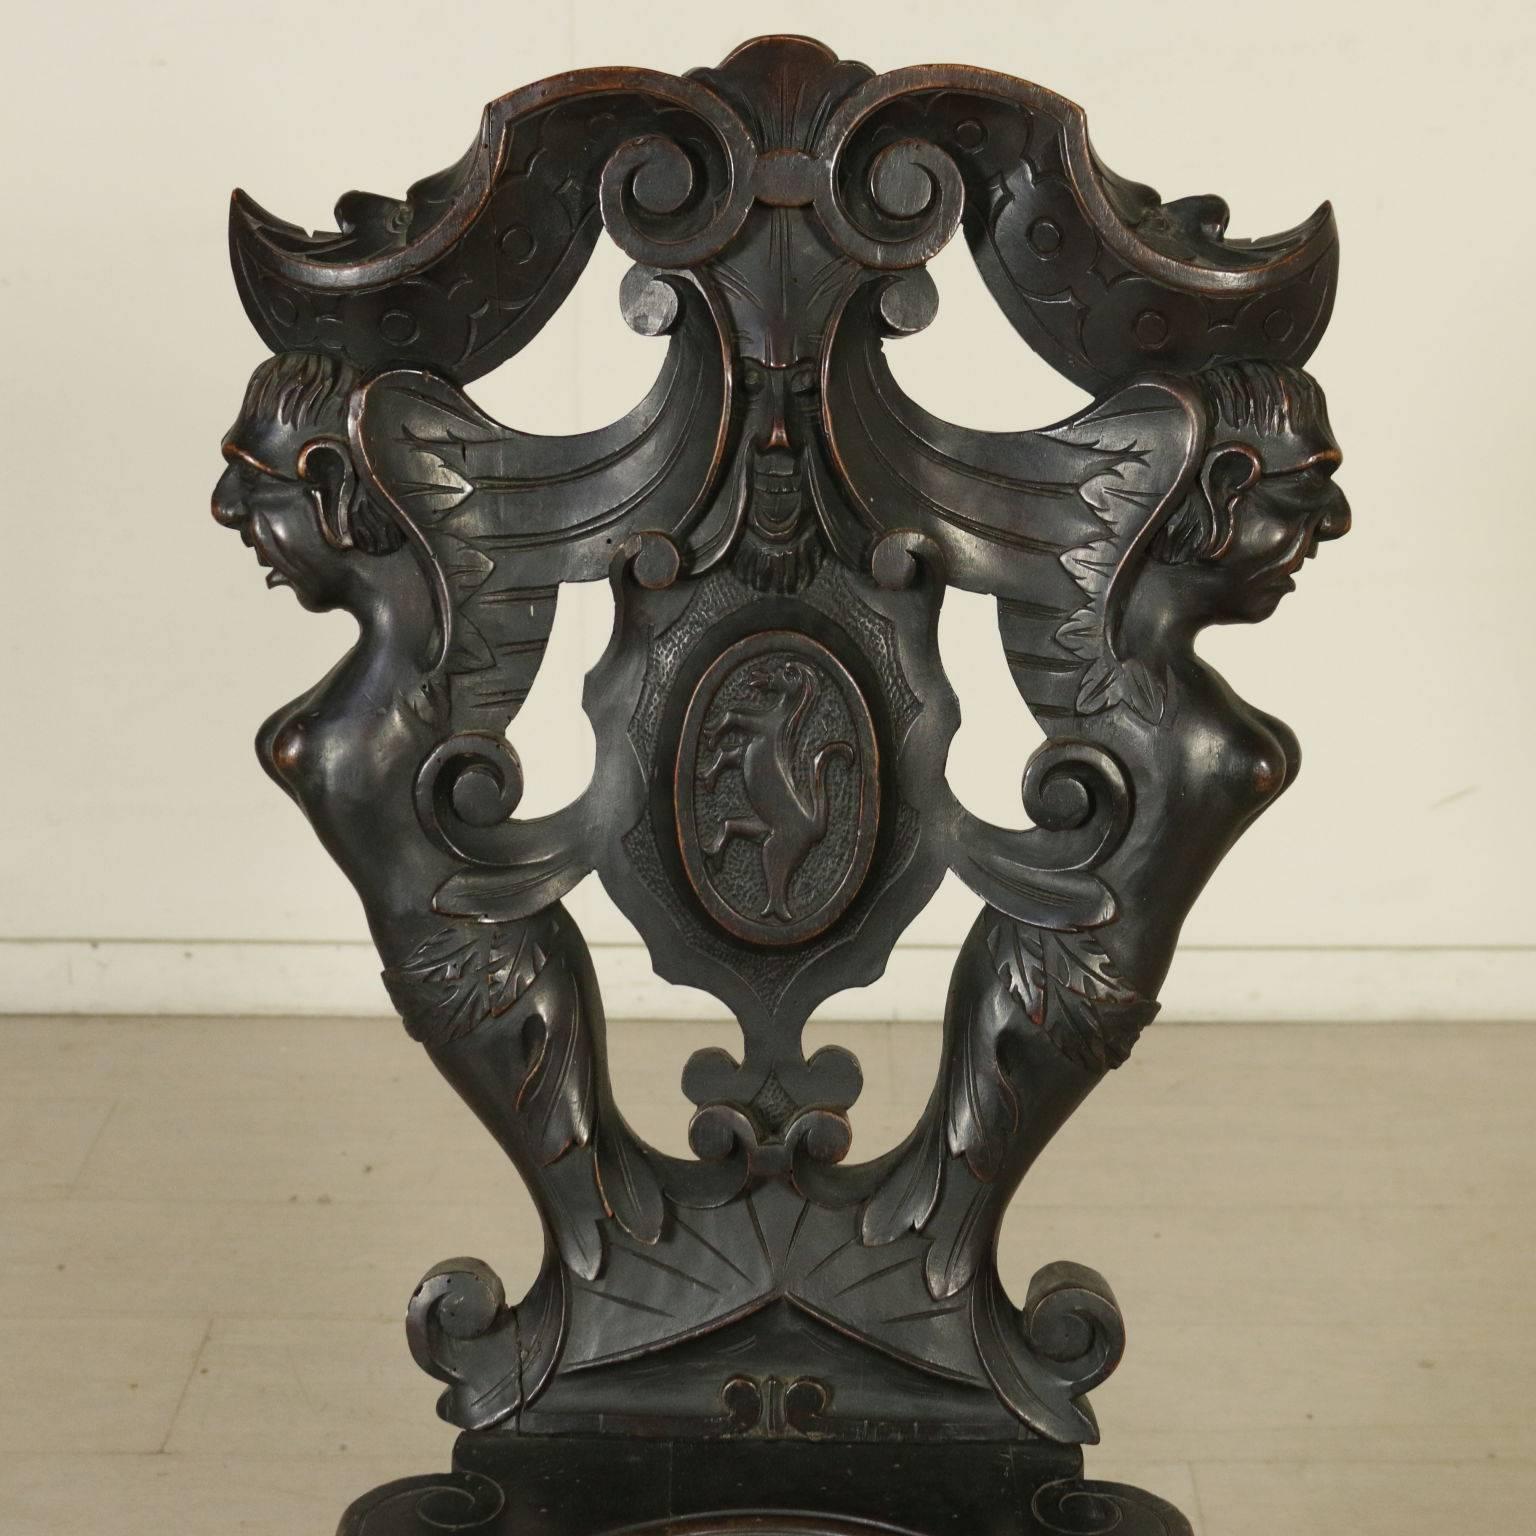 Renaissance Revival pair of walnut chairs. They feature inlaid legs and a richly carved backrest with leaf motifs, masks and family coat of arms. Manufactured in Italy, early 20th century.